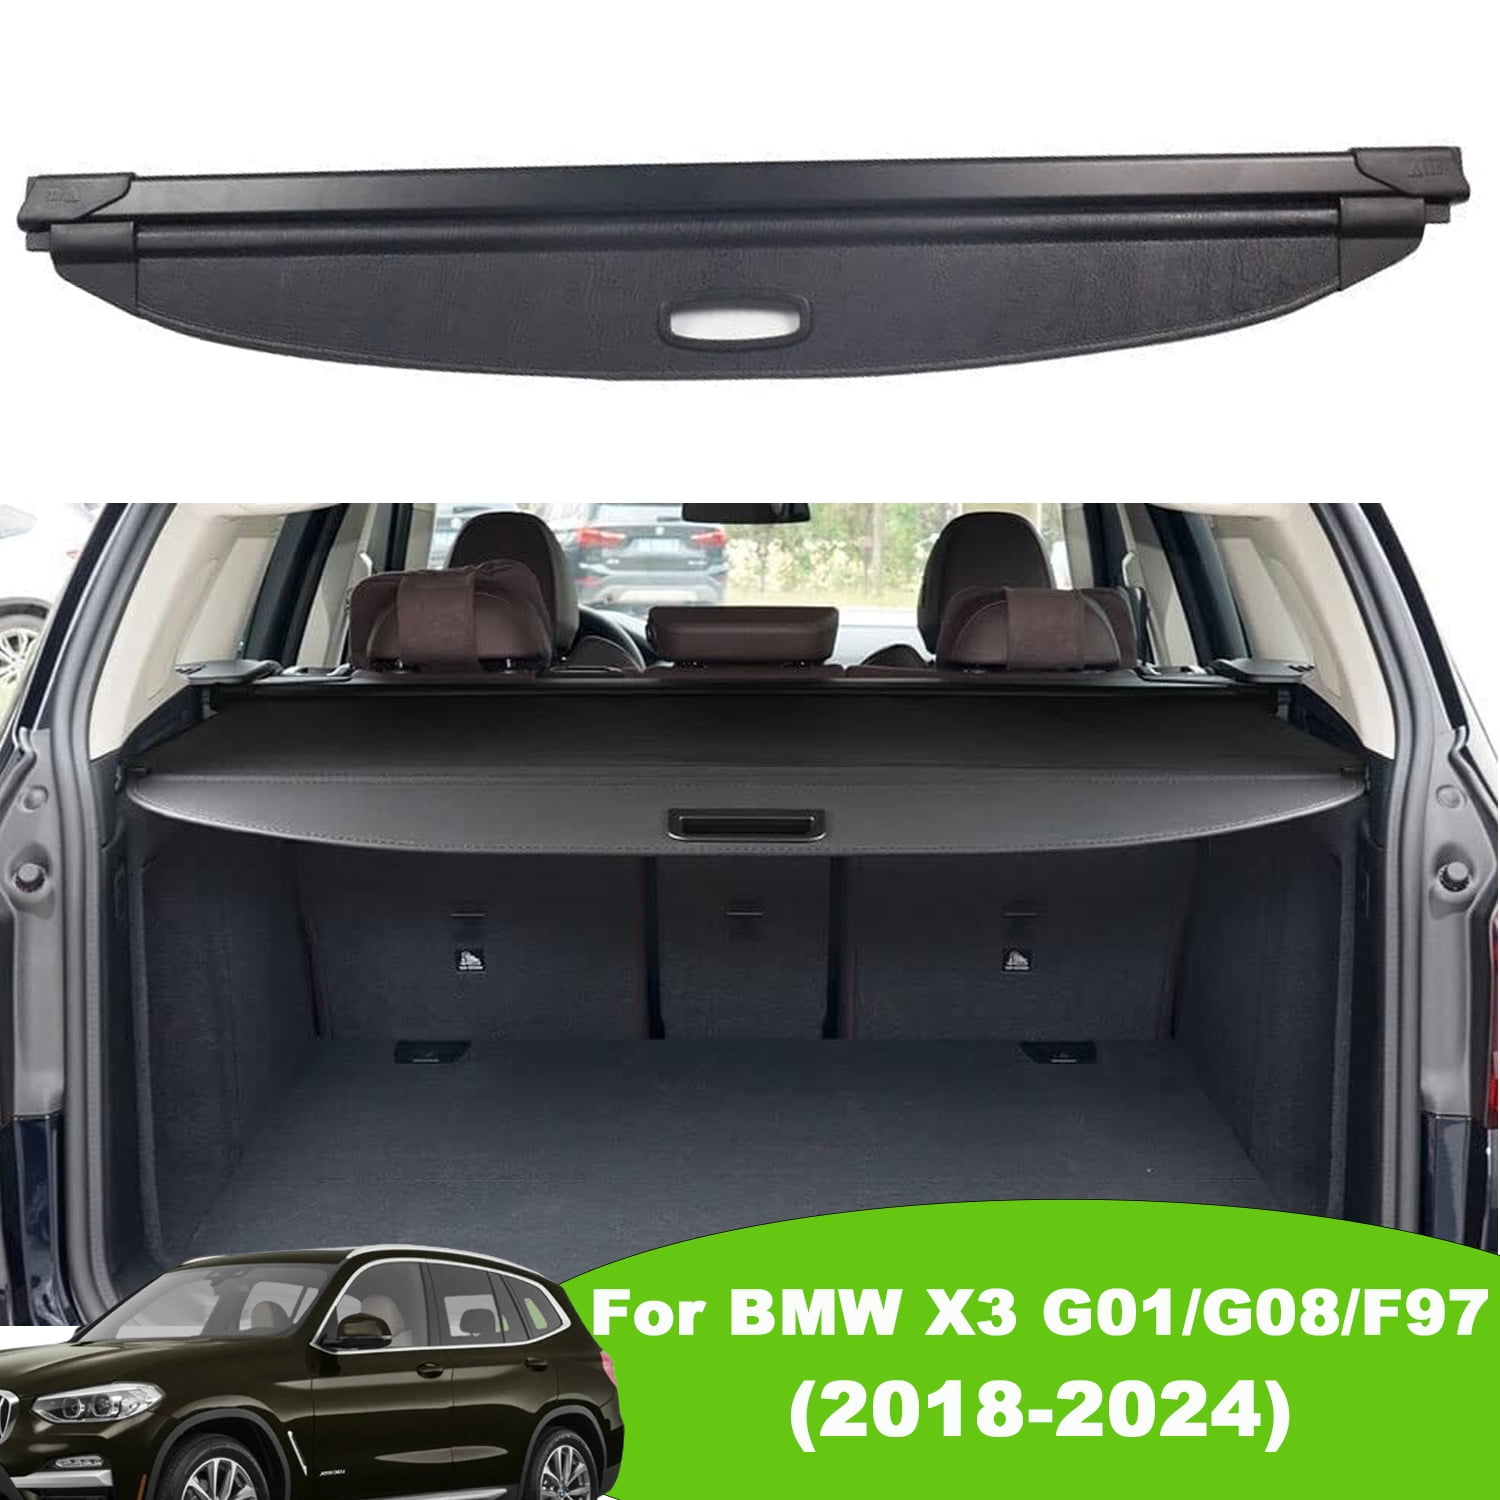 Fit 2018-2024 BMW X3 G01 G08 F97 Retractable Cargo Cover for BMW X3 2018 2019  2020 2021 2022 2023 2024 SUV Accessory Black Rear Trunk Privacy Security  Shade Shield Cover 